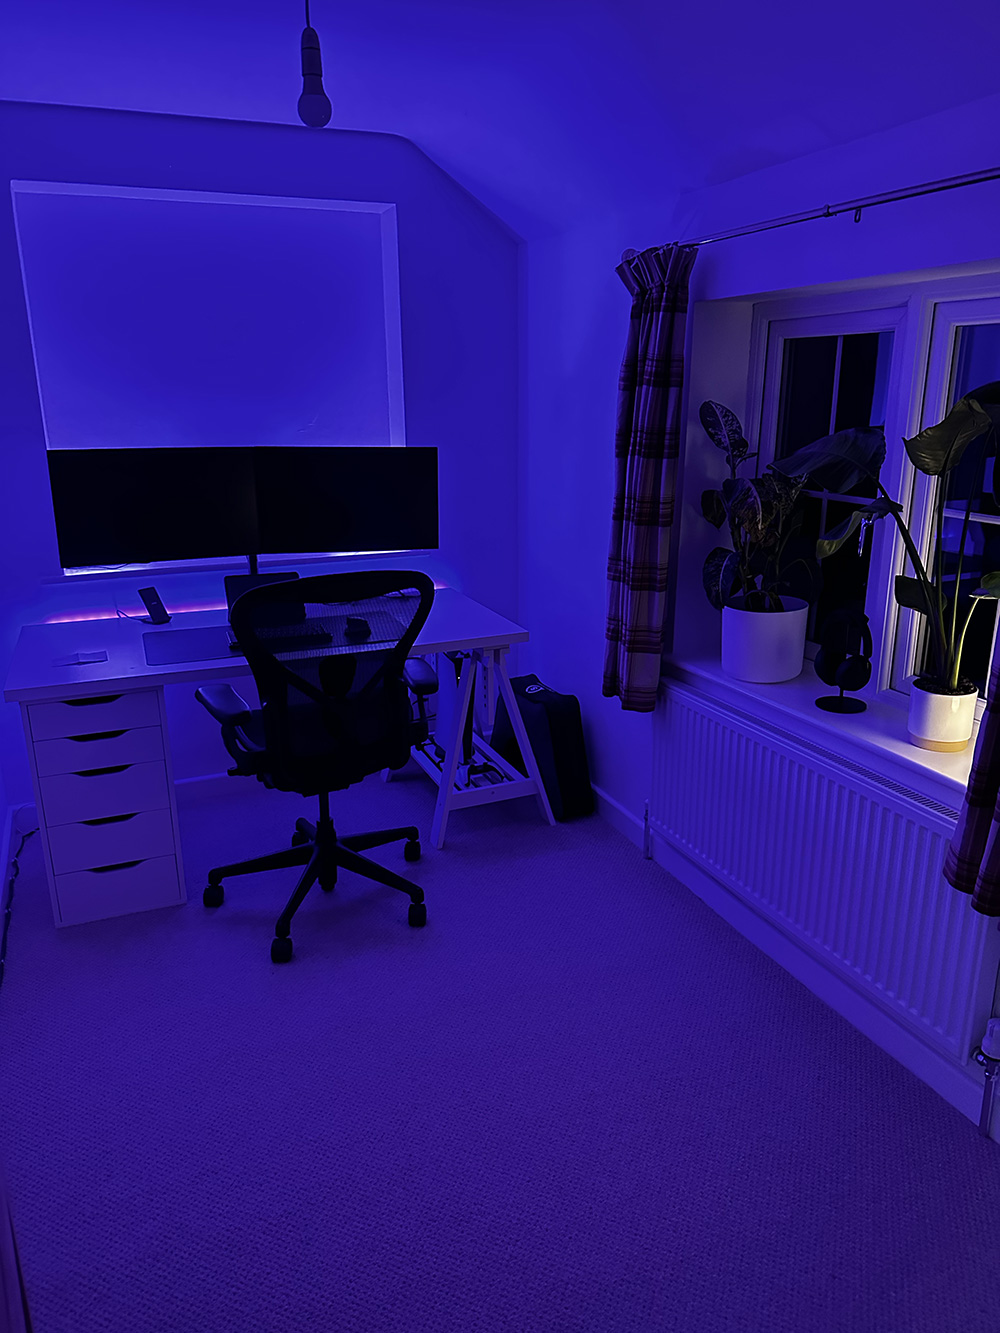 My setup at night, bathed in purple light, with a small white light coming from a diffuser on the windowsill